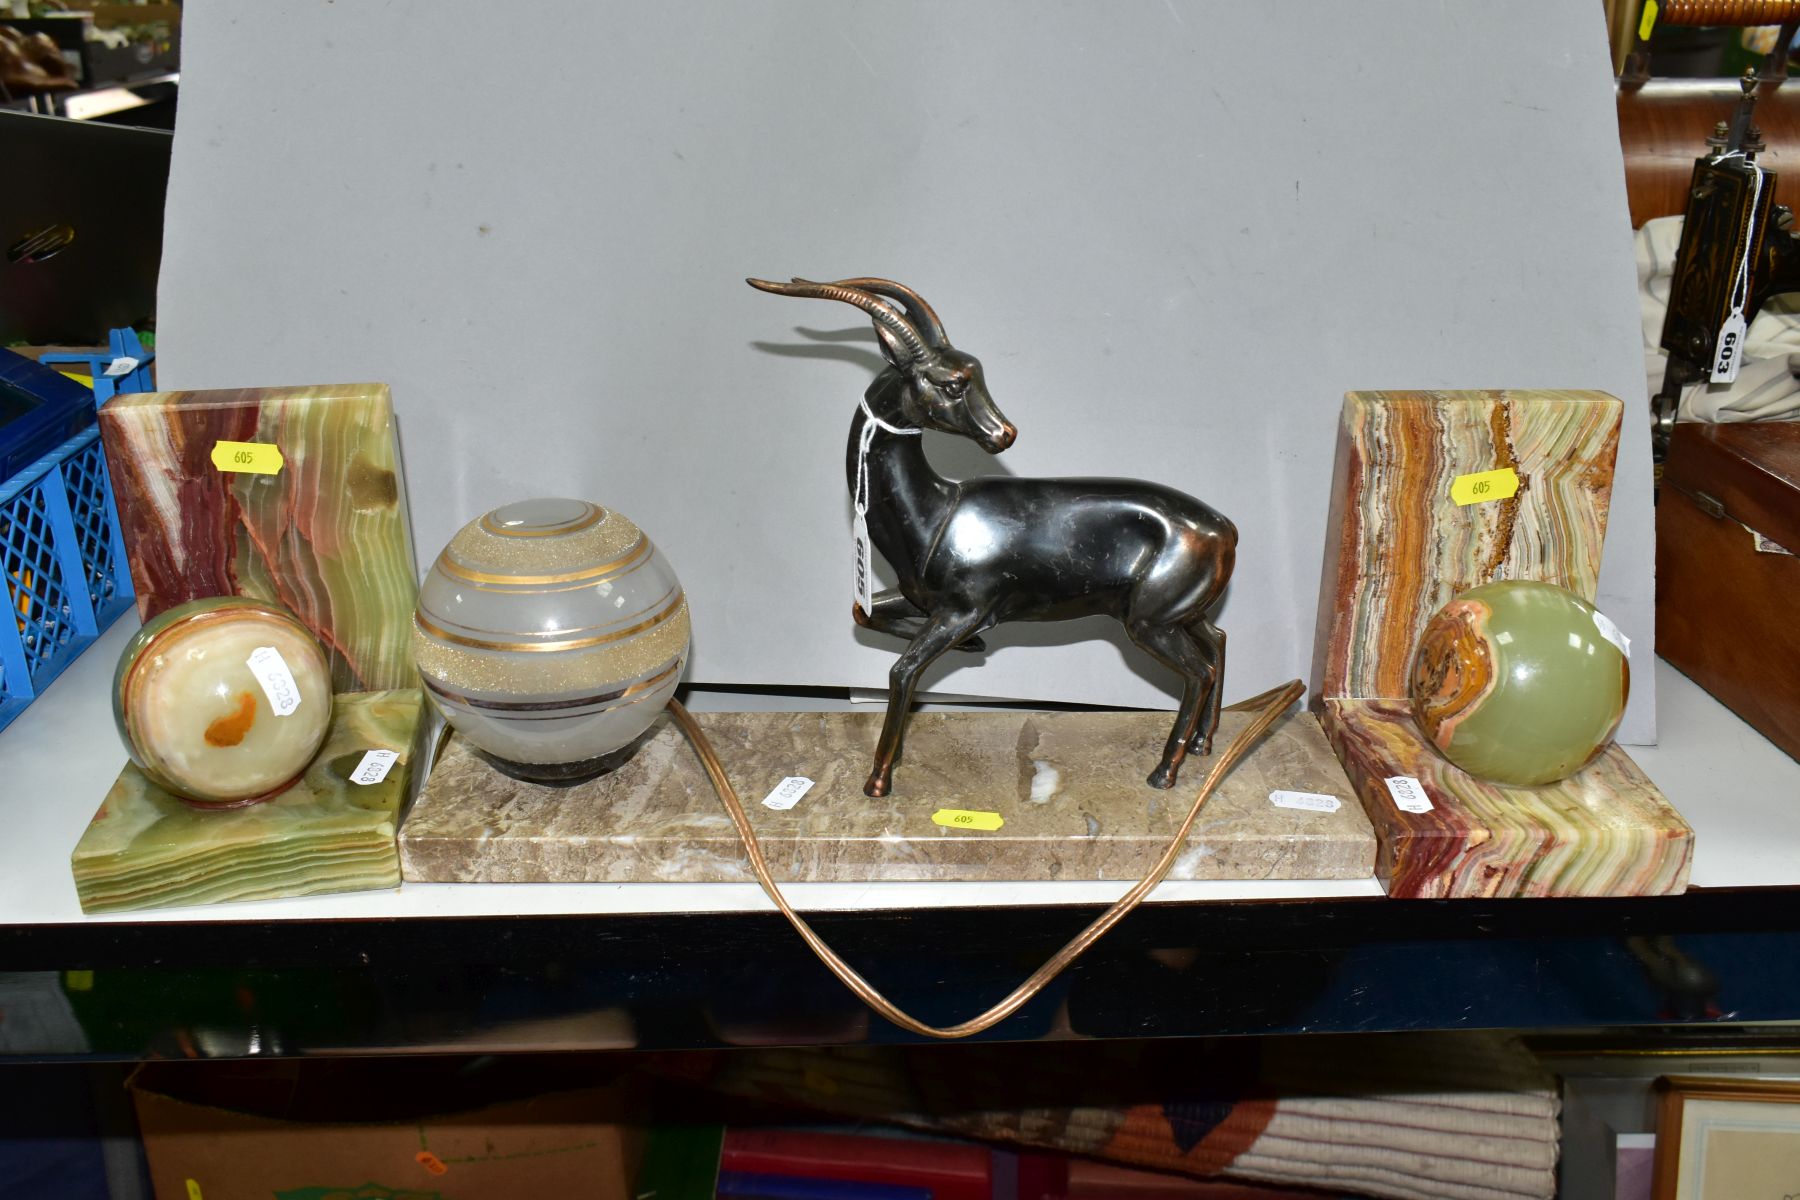 AN ART DECO MARBLE DESK LAMP WITH SPELTER ANTELOPE SCULPTURE, approximate length 35cm, a pair of